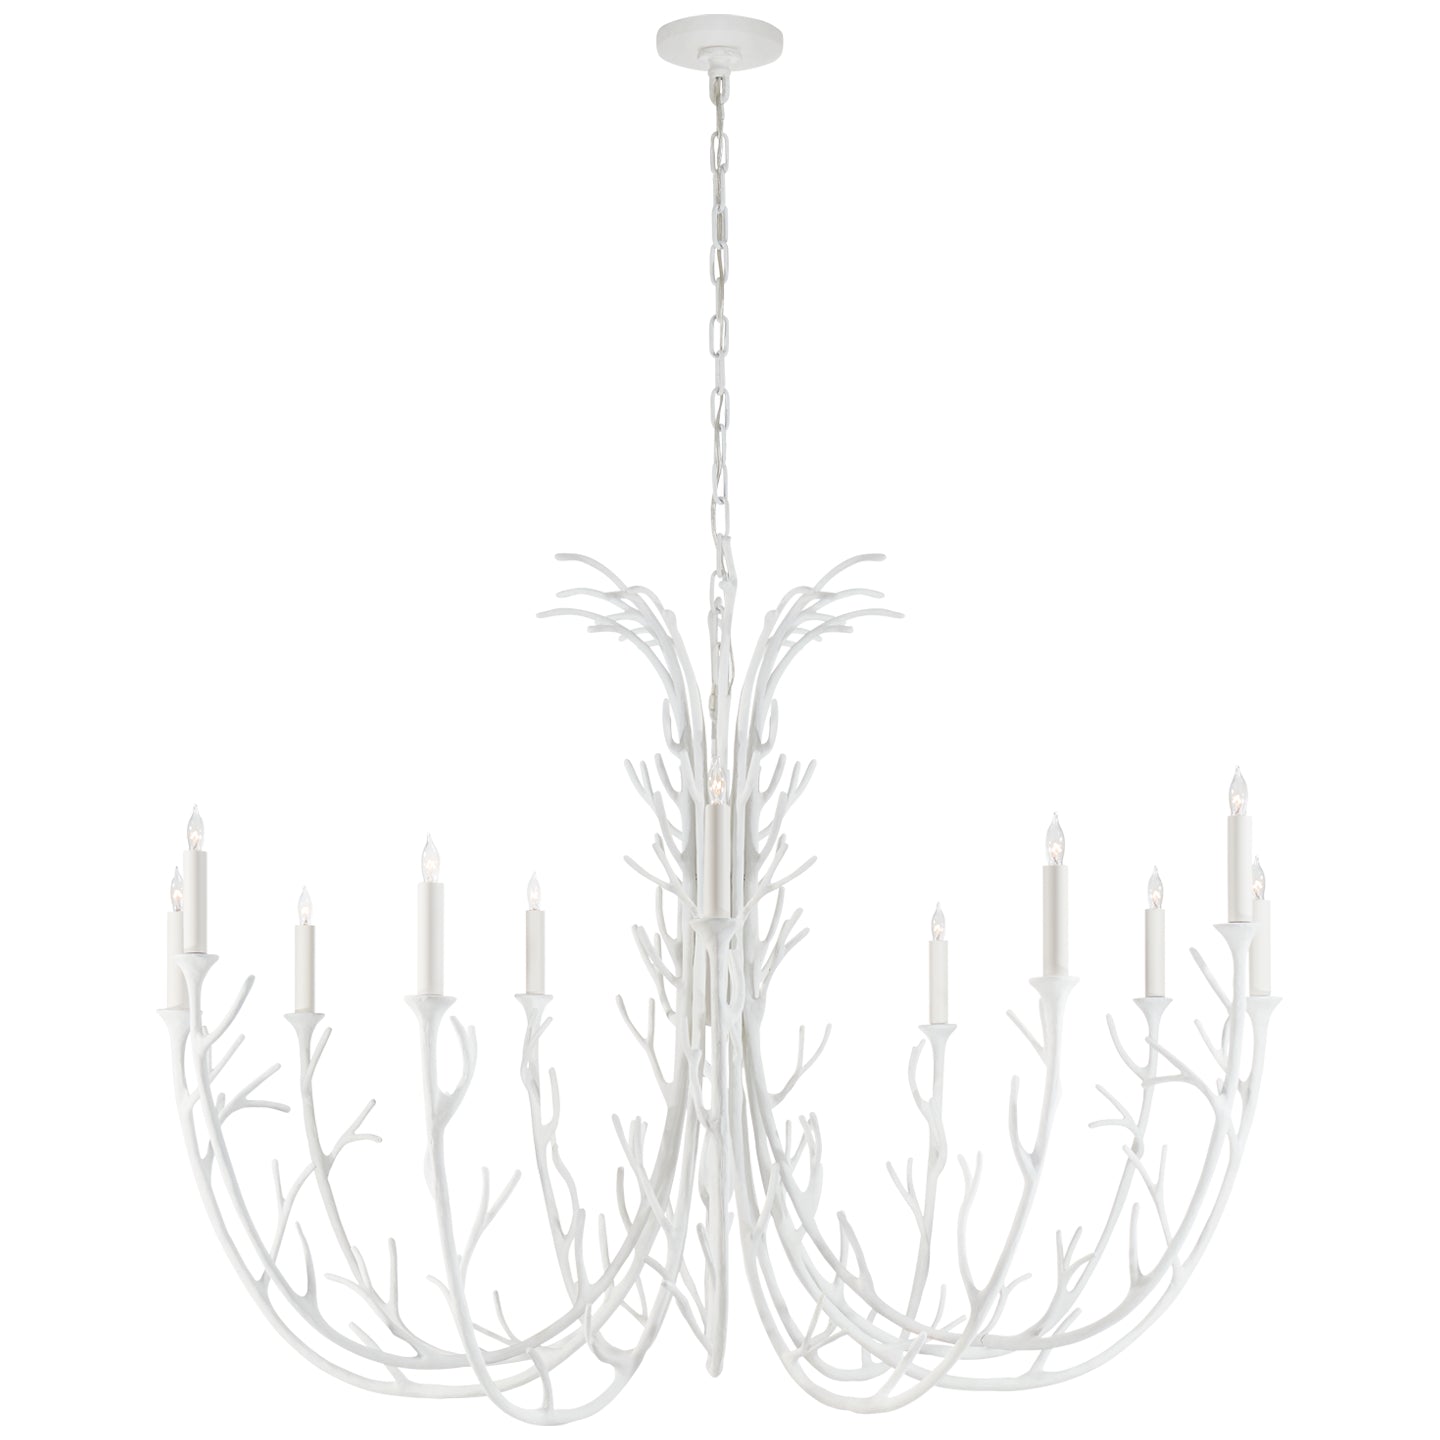 Load image into Gallery viewer, Visual Comfort Signature - JN 5080PW - 12 Light Chandelier - Silva - Plaster White
